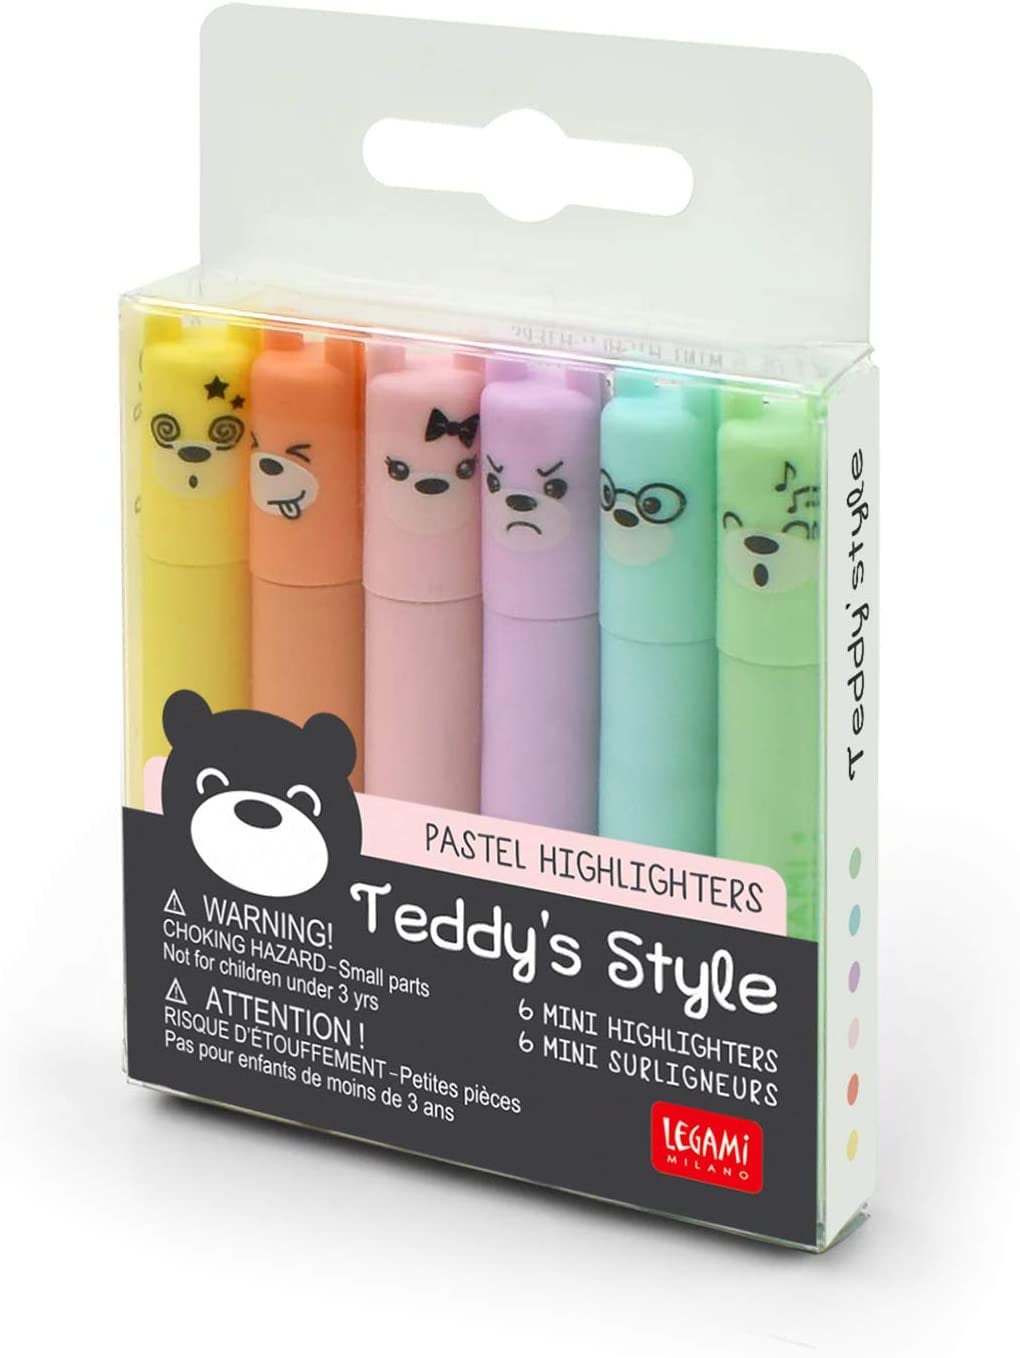 Set of 6 Mini Highlighters Legami Teddy's Style Yellow/peach/pink